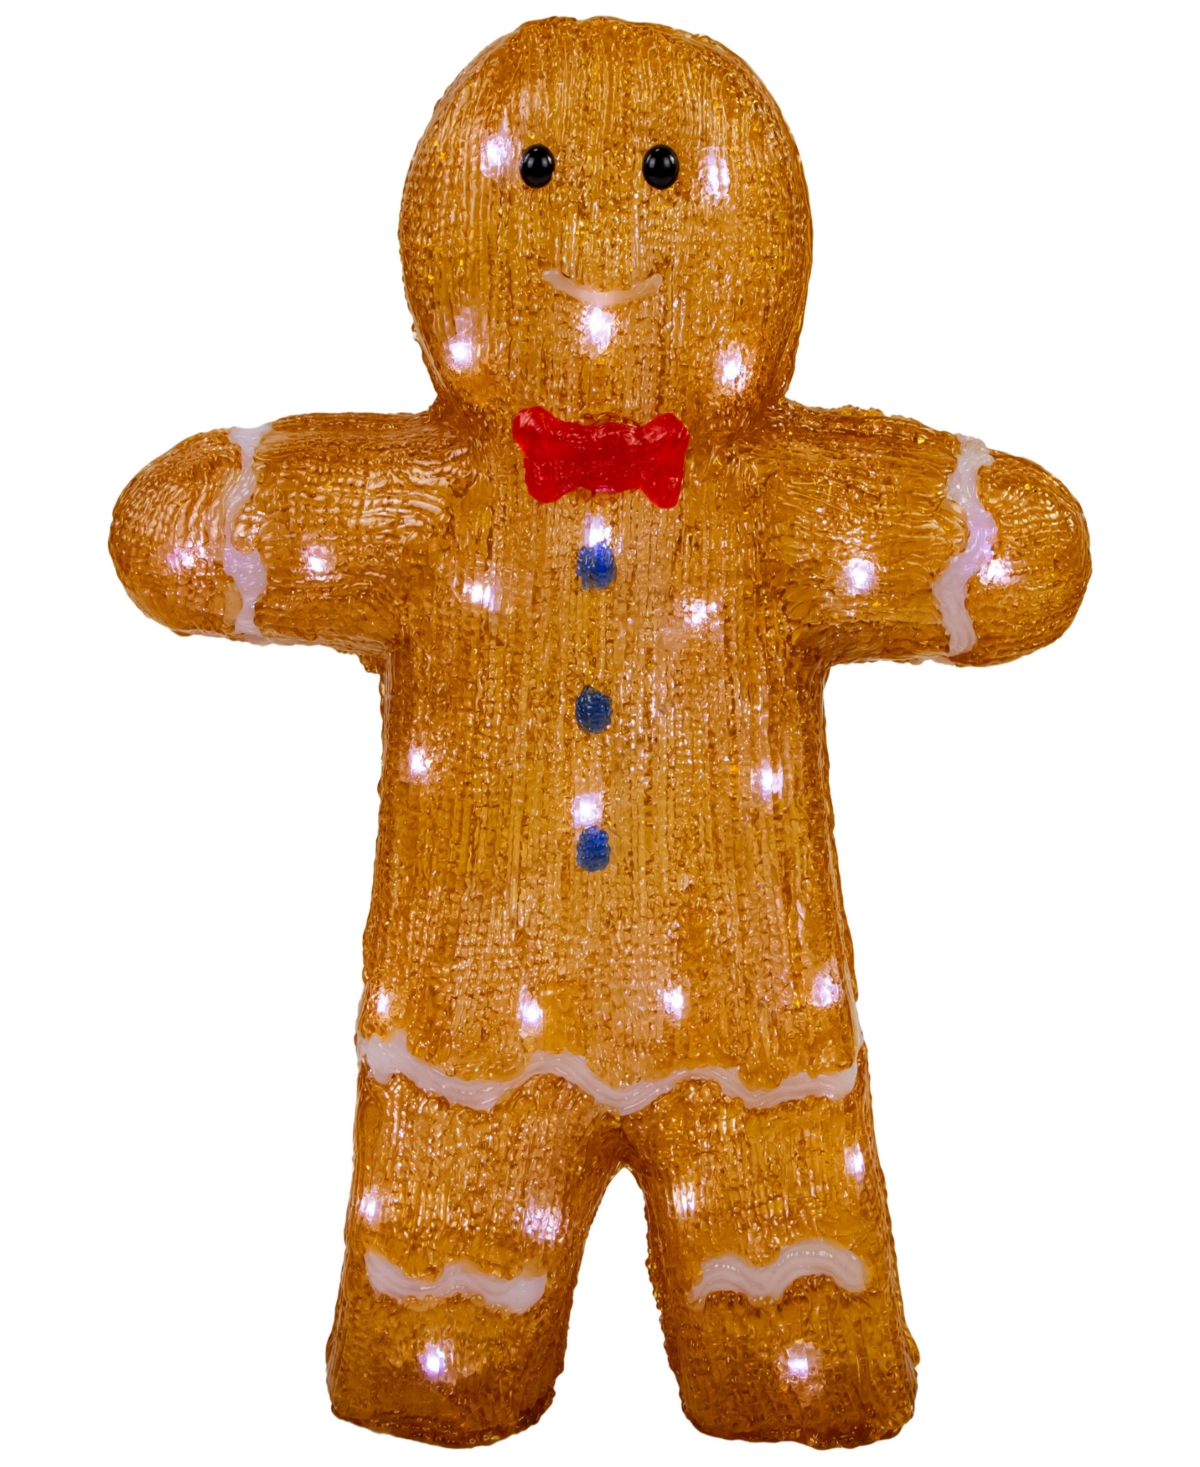 16" Light Emitting Diode (Led) Lighted Acrylic Gingerbread Man with Bow Tie Christmas Decoration - Brown